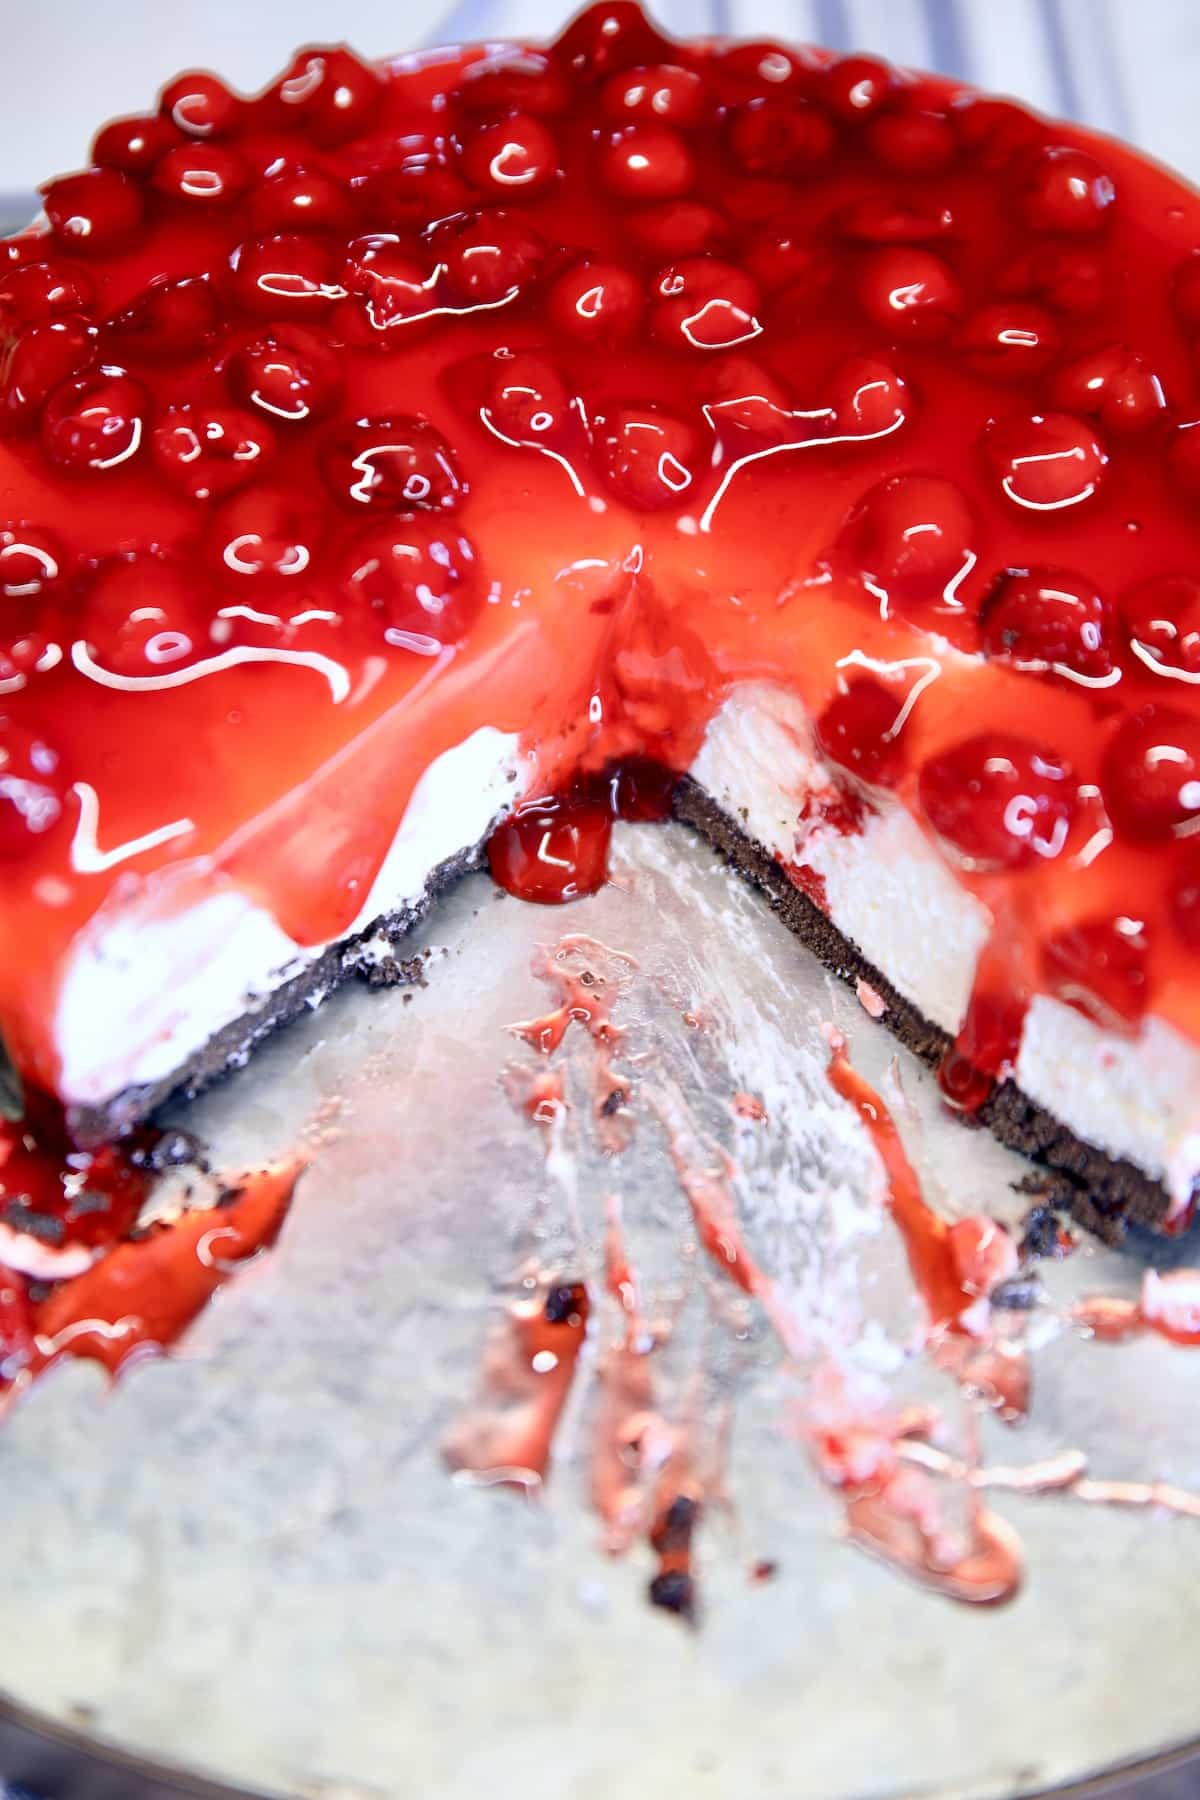 Cherry cheesecake on a platter, 2 slices removed.